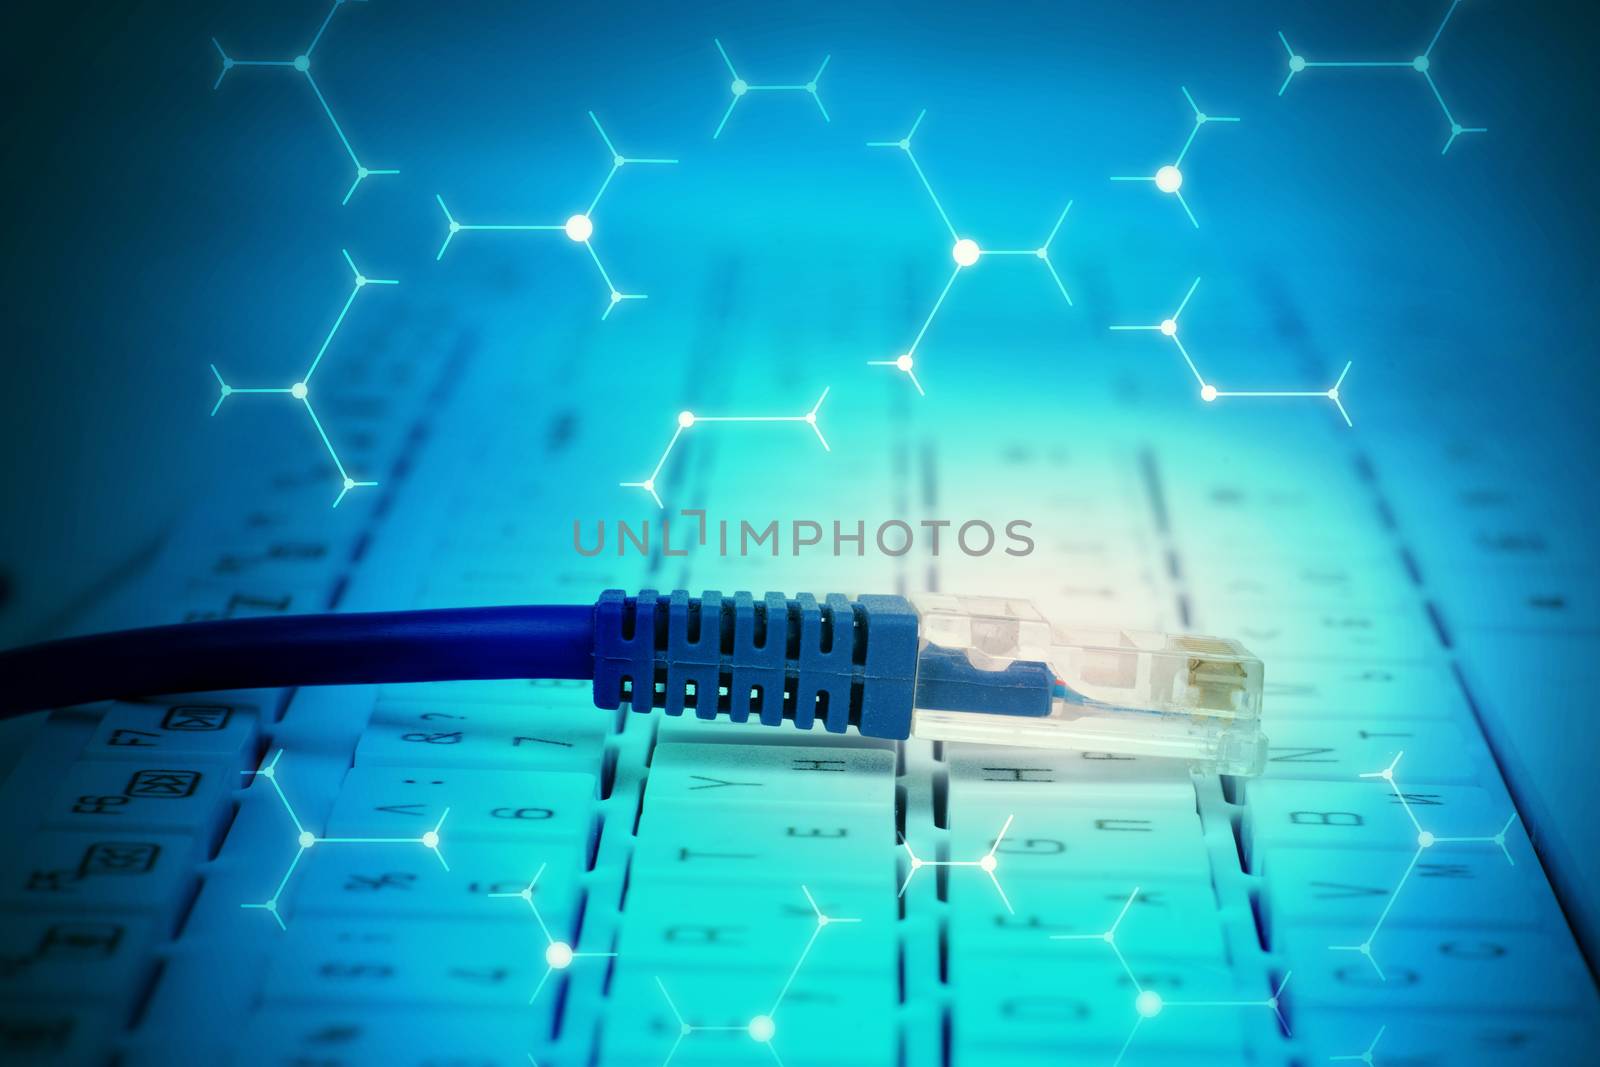 Computer cable on keyboard in abstract blue background with signs